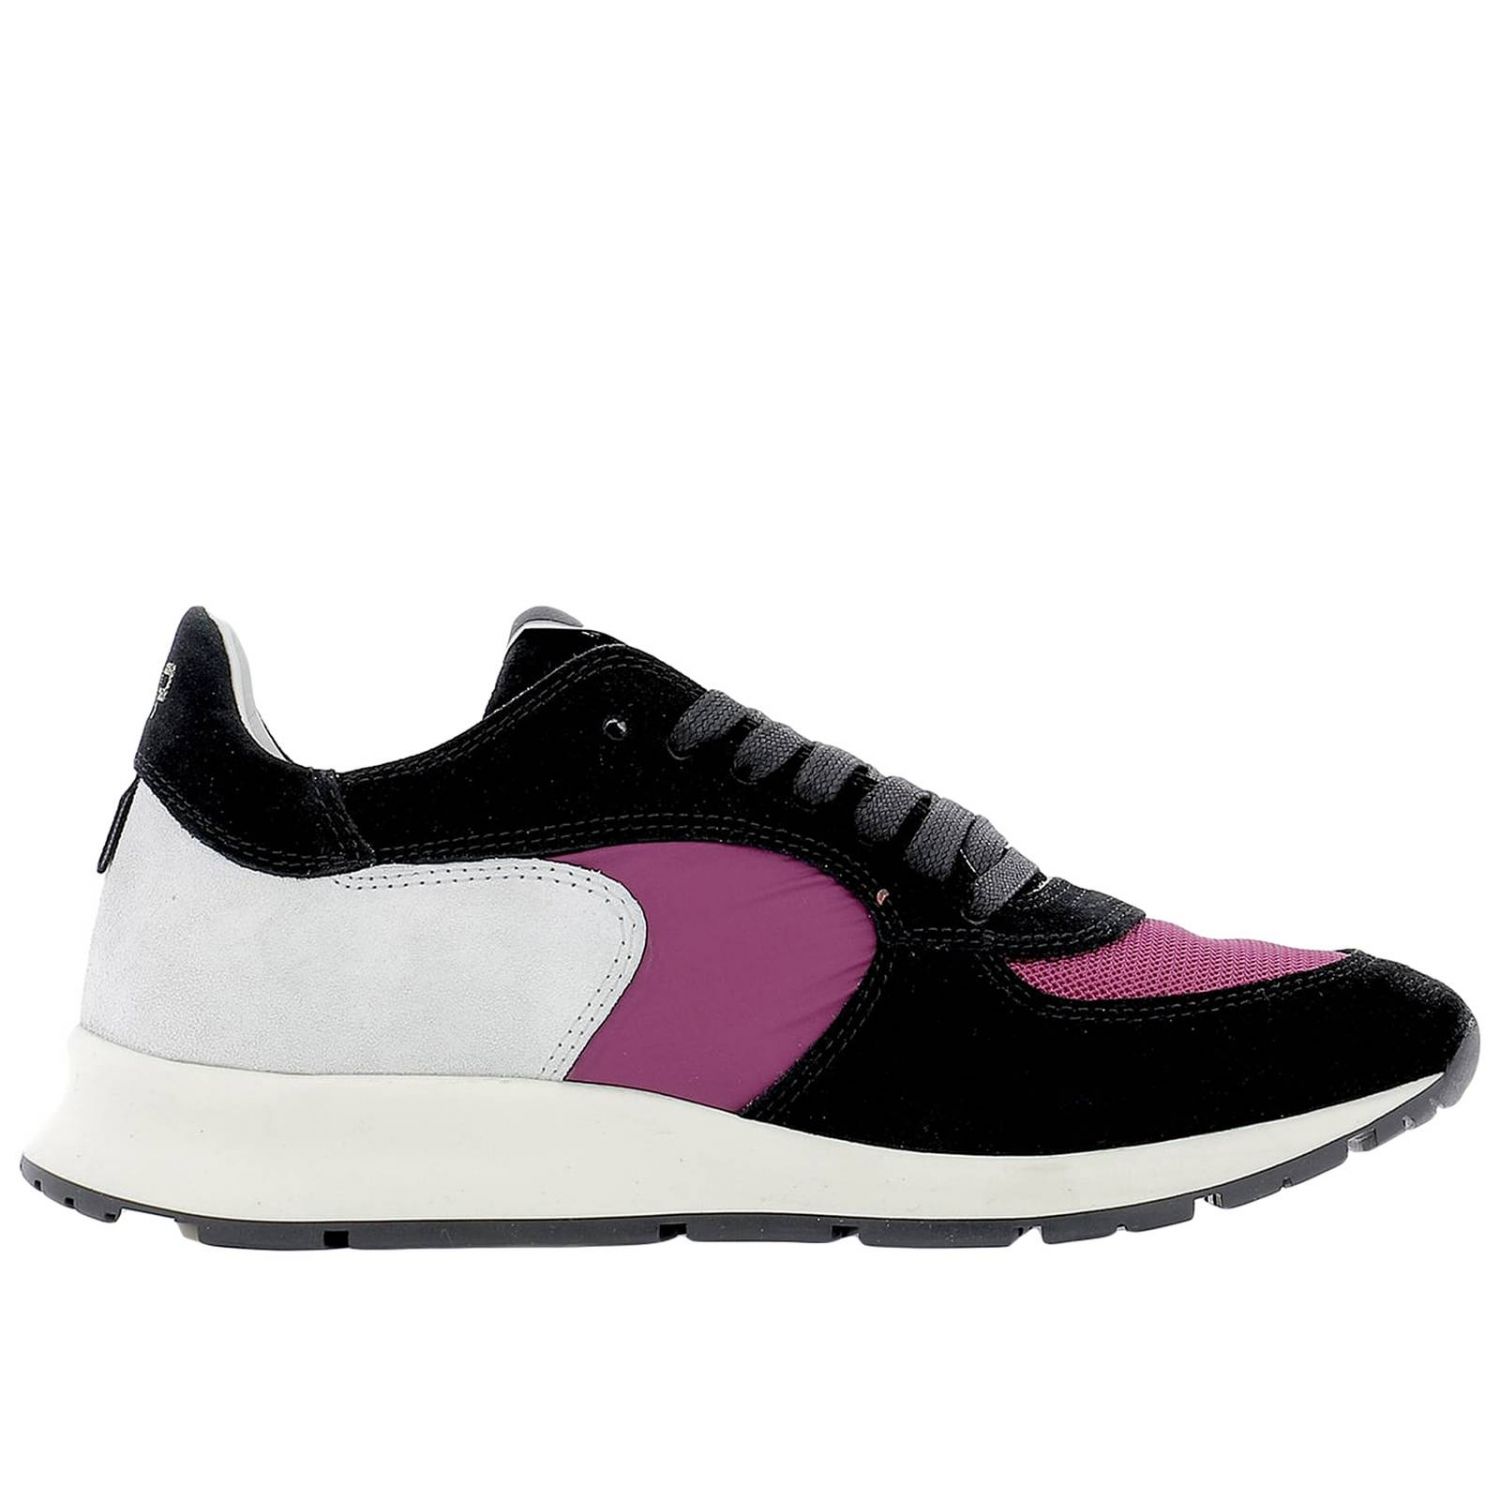 Philippe Model Outlet: Shoes women | Sneakers Philippe Model Women ...